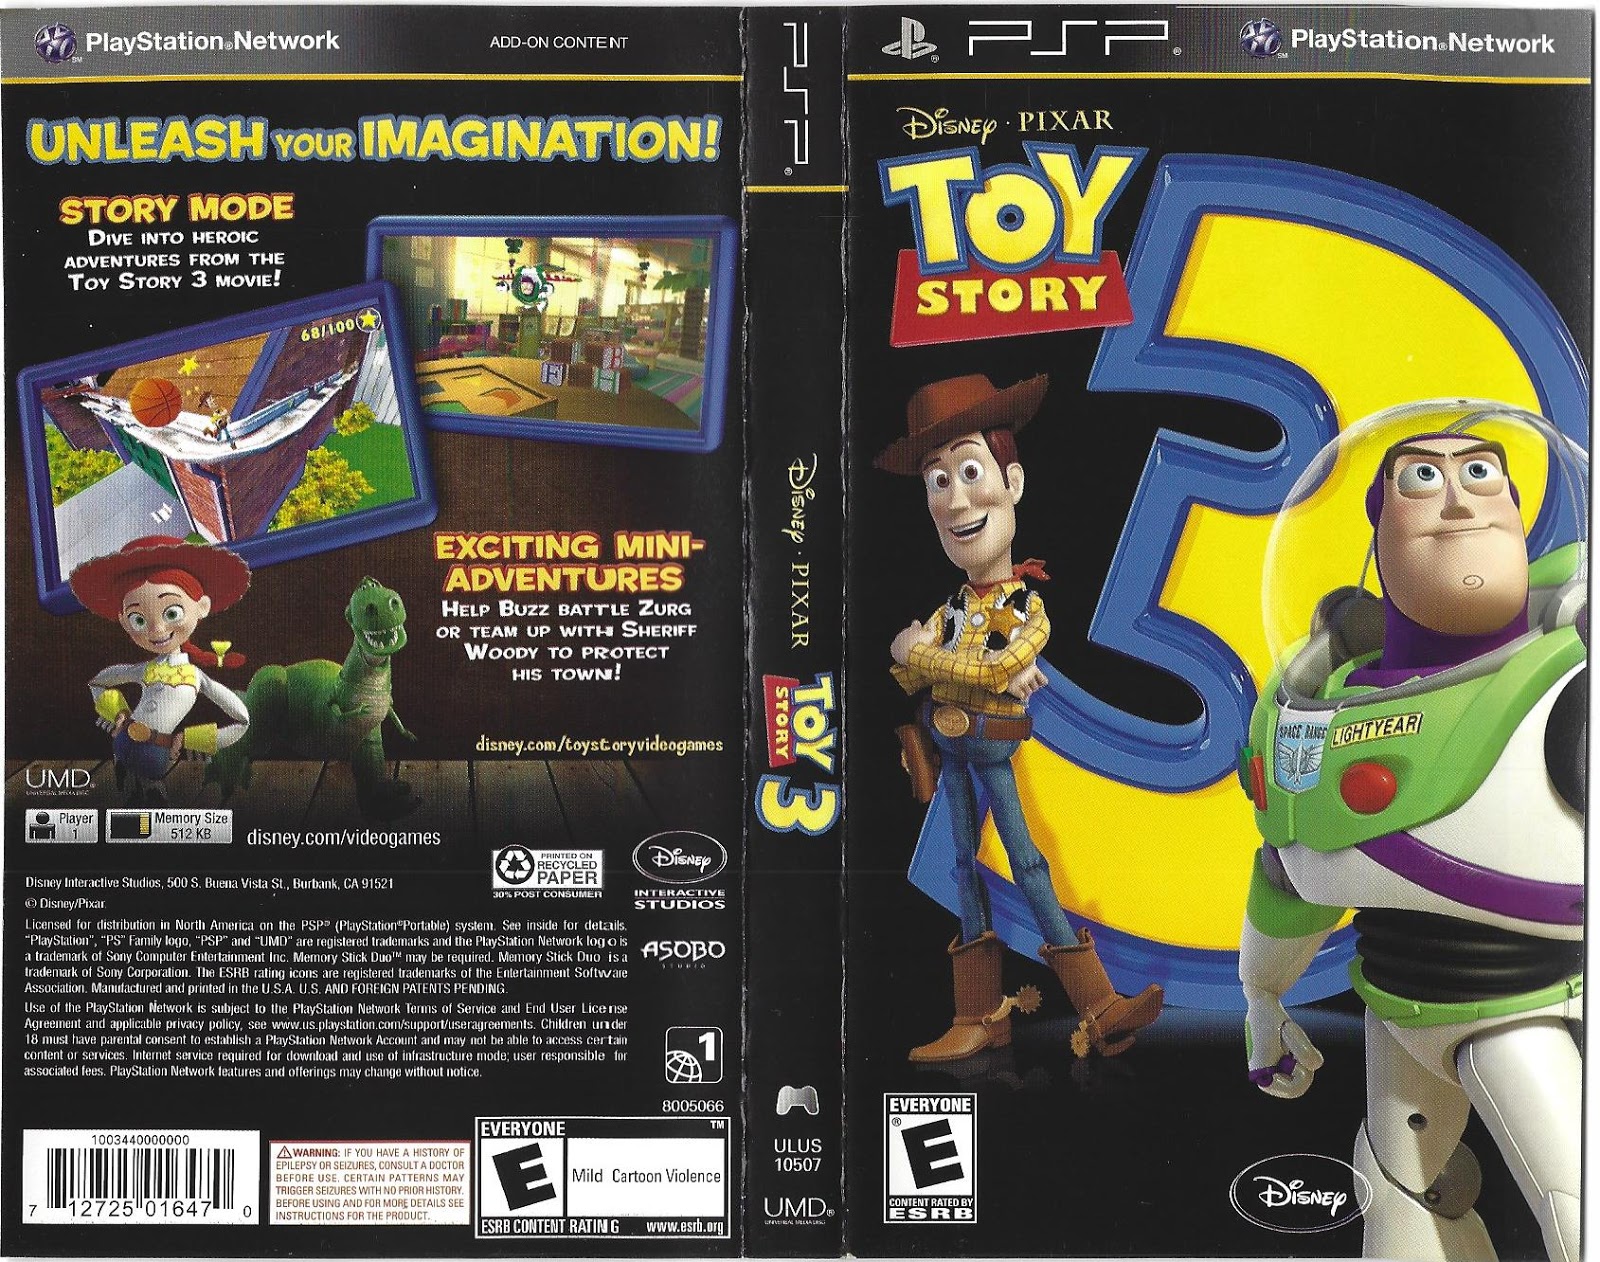 Игры на псп 3. Toy story 3 ps2. Toy story 3 PSP обложка. Toy story 3 ps2 обложка. Игра Toy story 3 PSP.